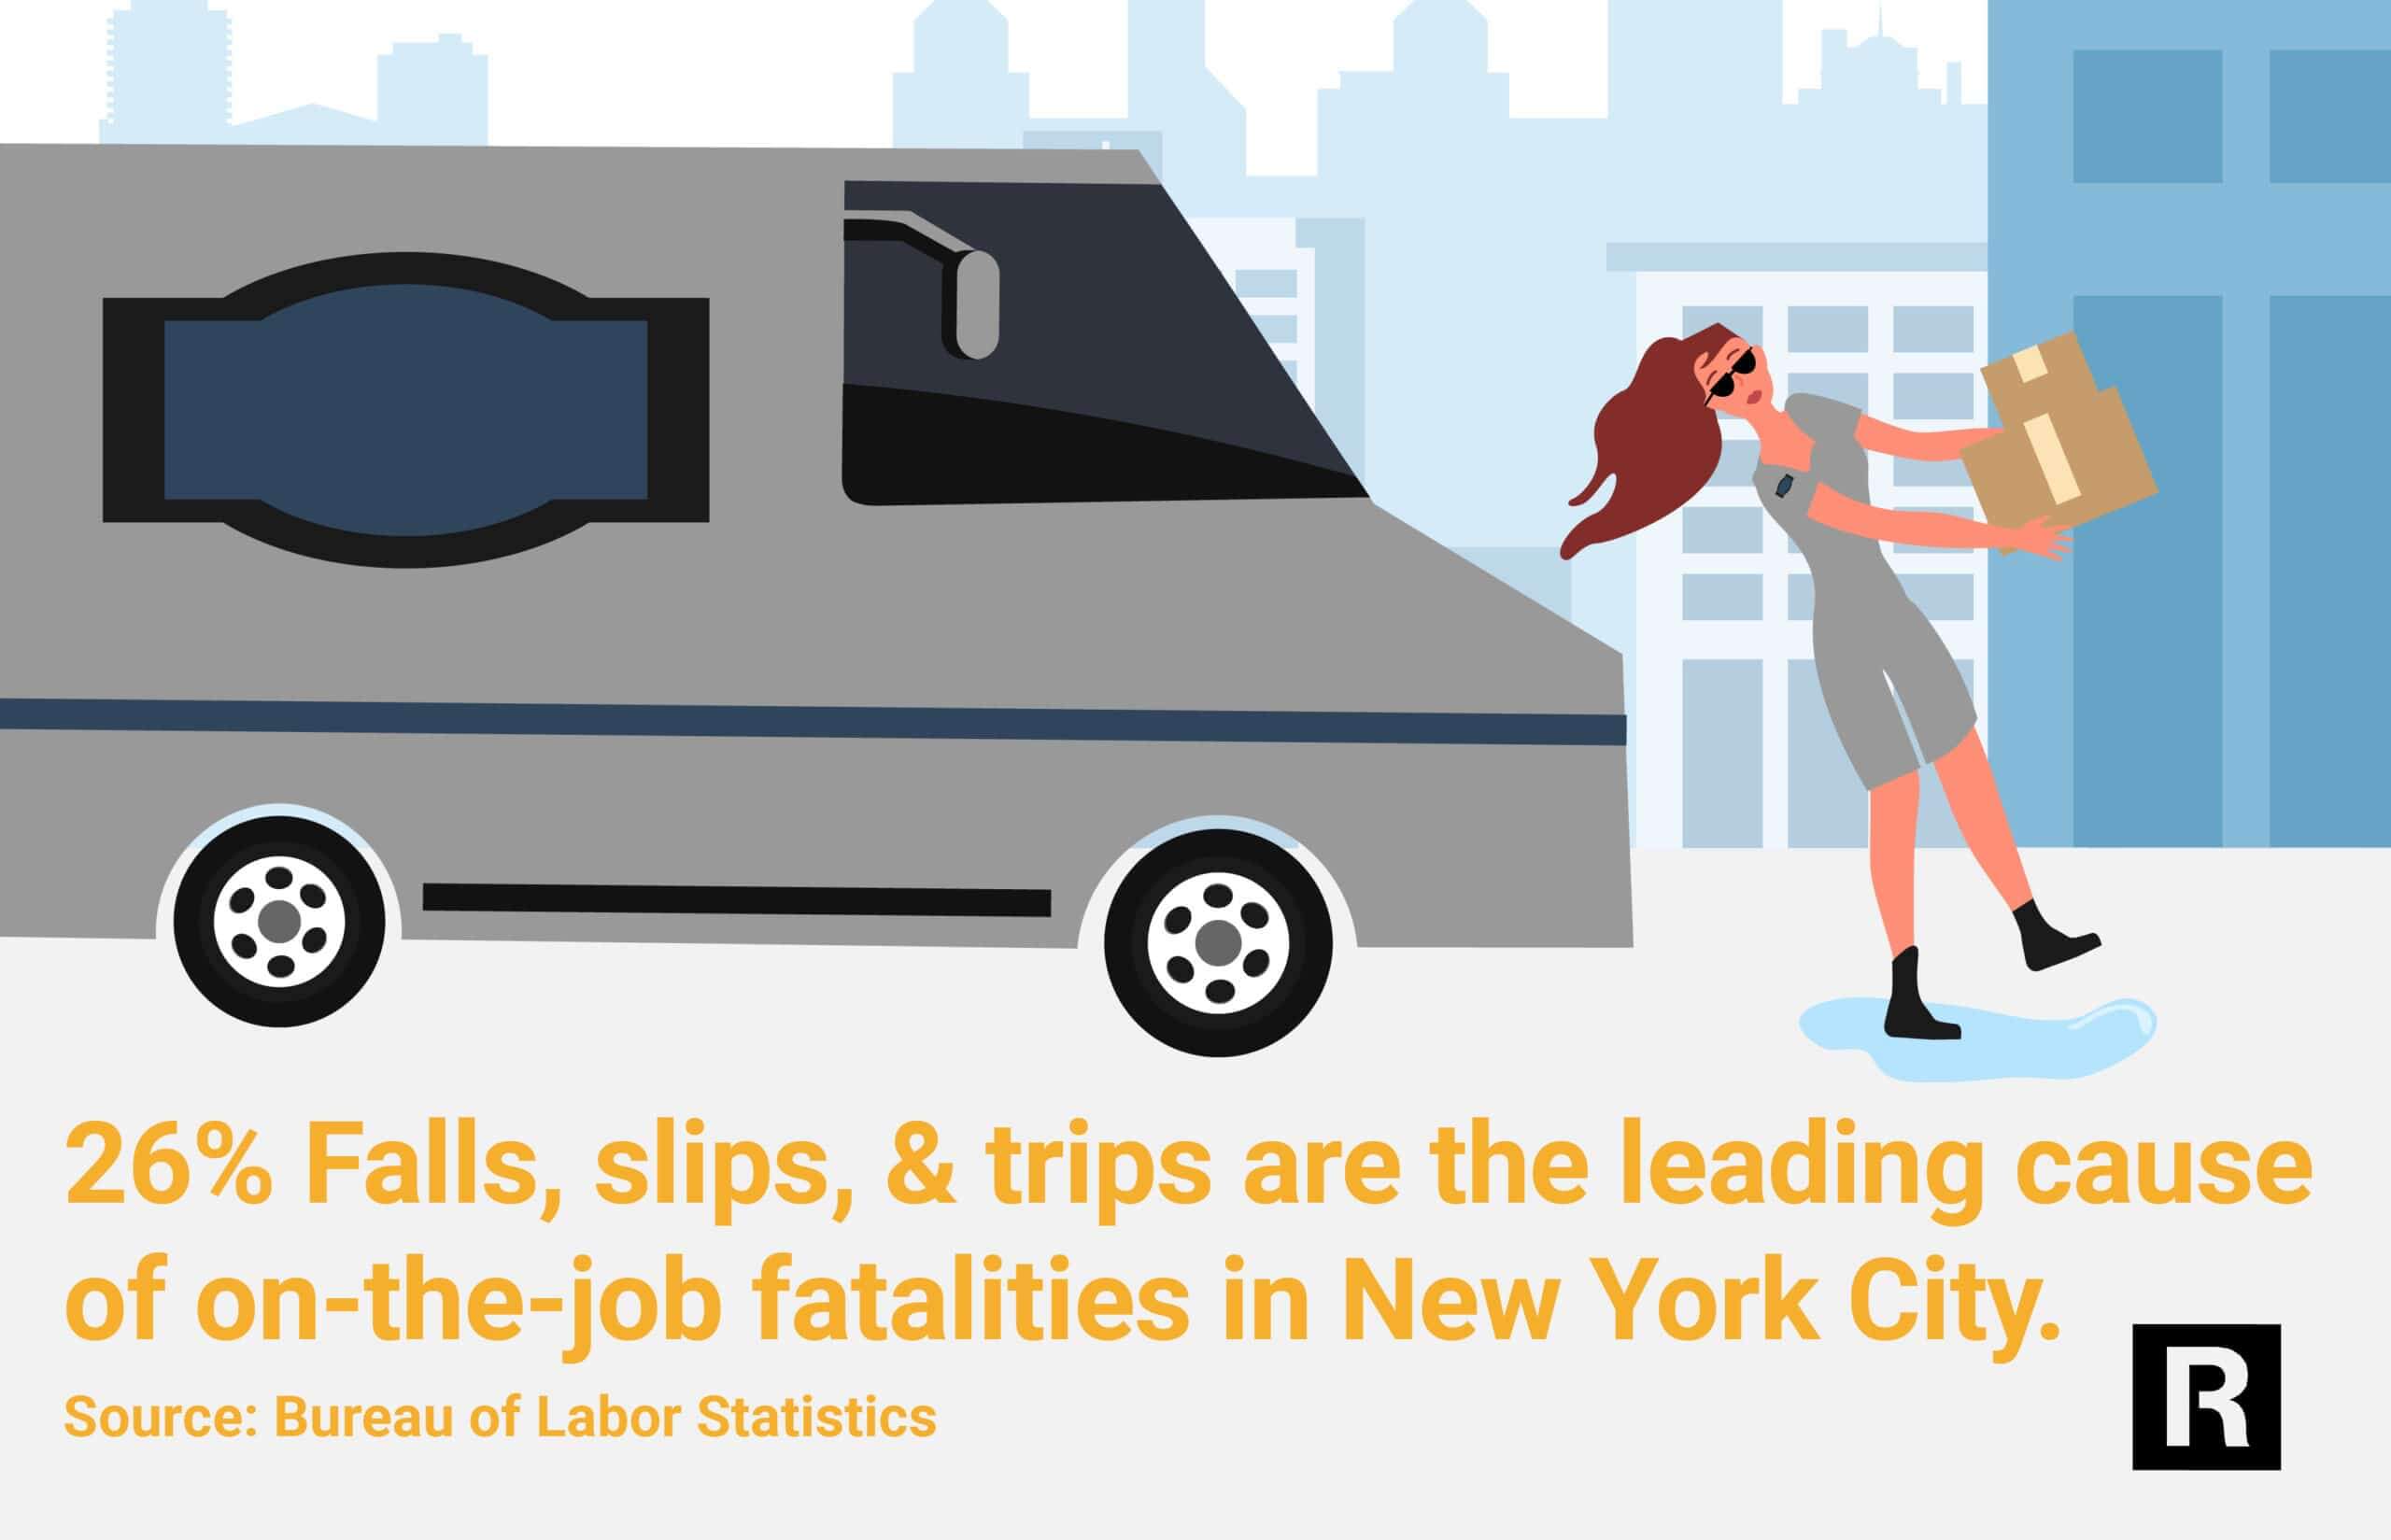 26% falls, slips, & trips are the leading cause of on-the-job fatalities in New York City. 